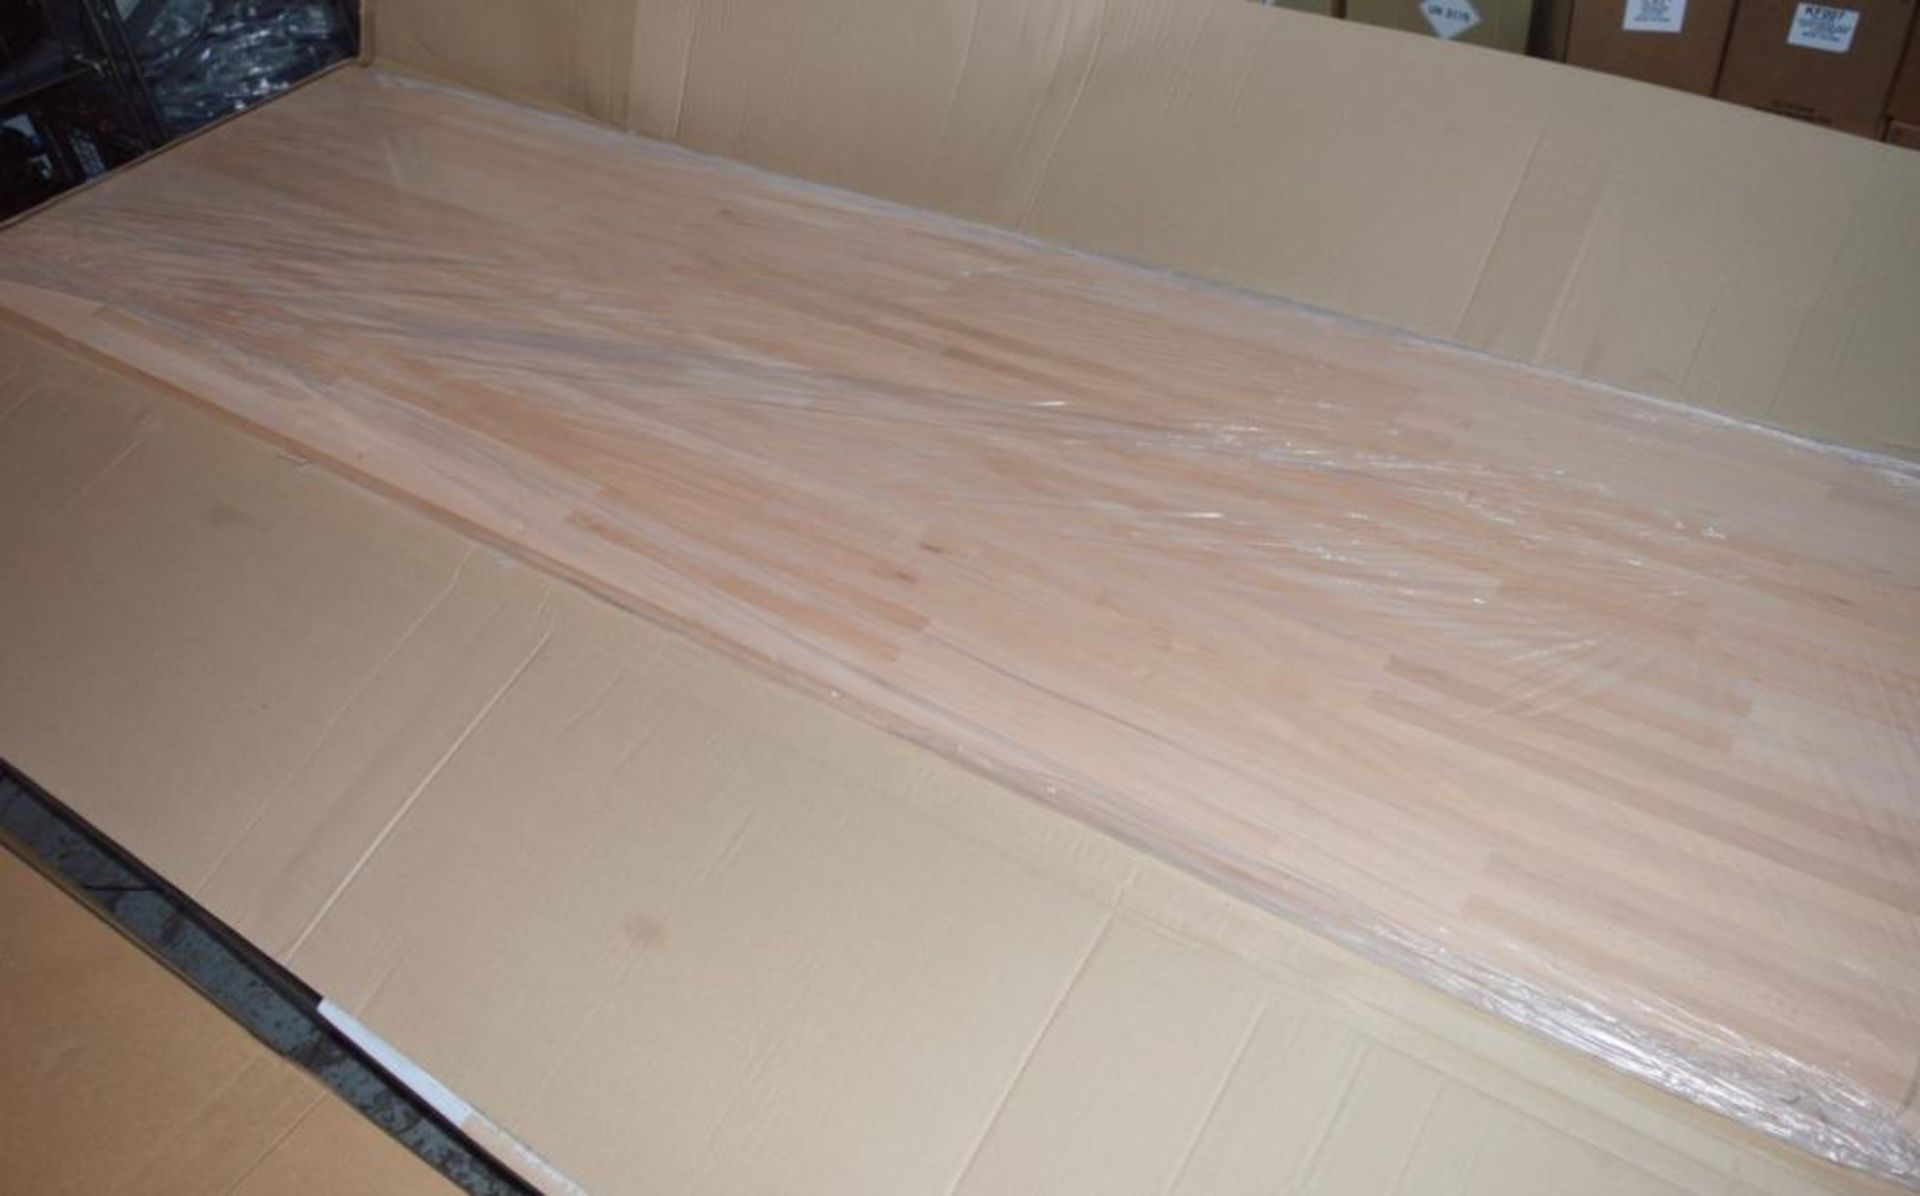 1 x Solid Wood Kitchen Worktop - PRIME BEECH - First Grade Finger Jointed Kitchen Worktop - Size: 40 - Image 3 of 5